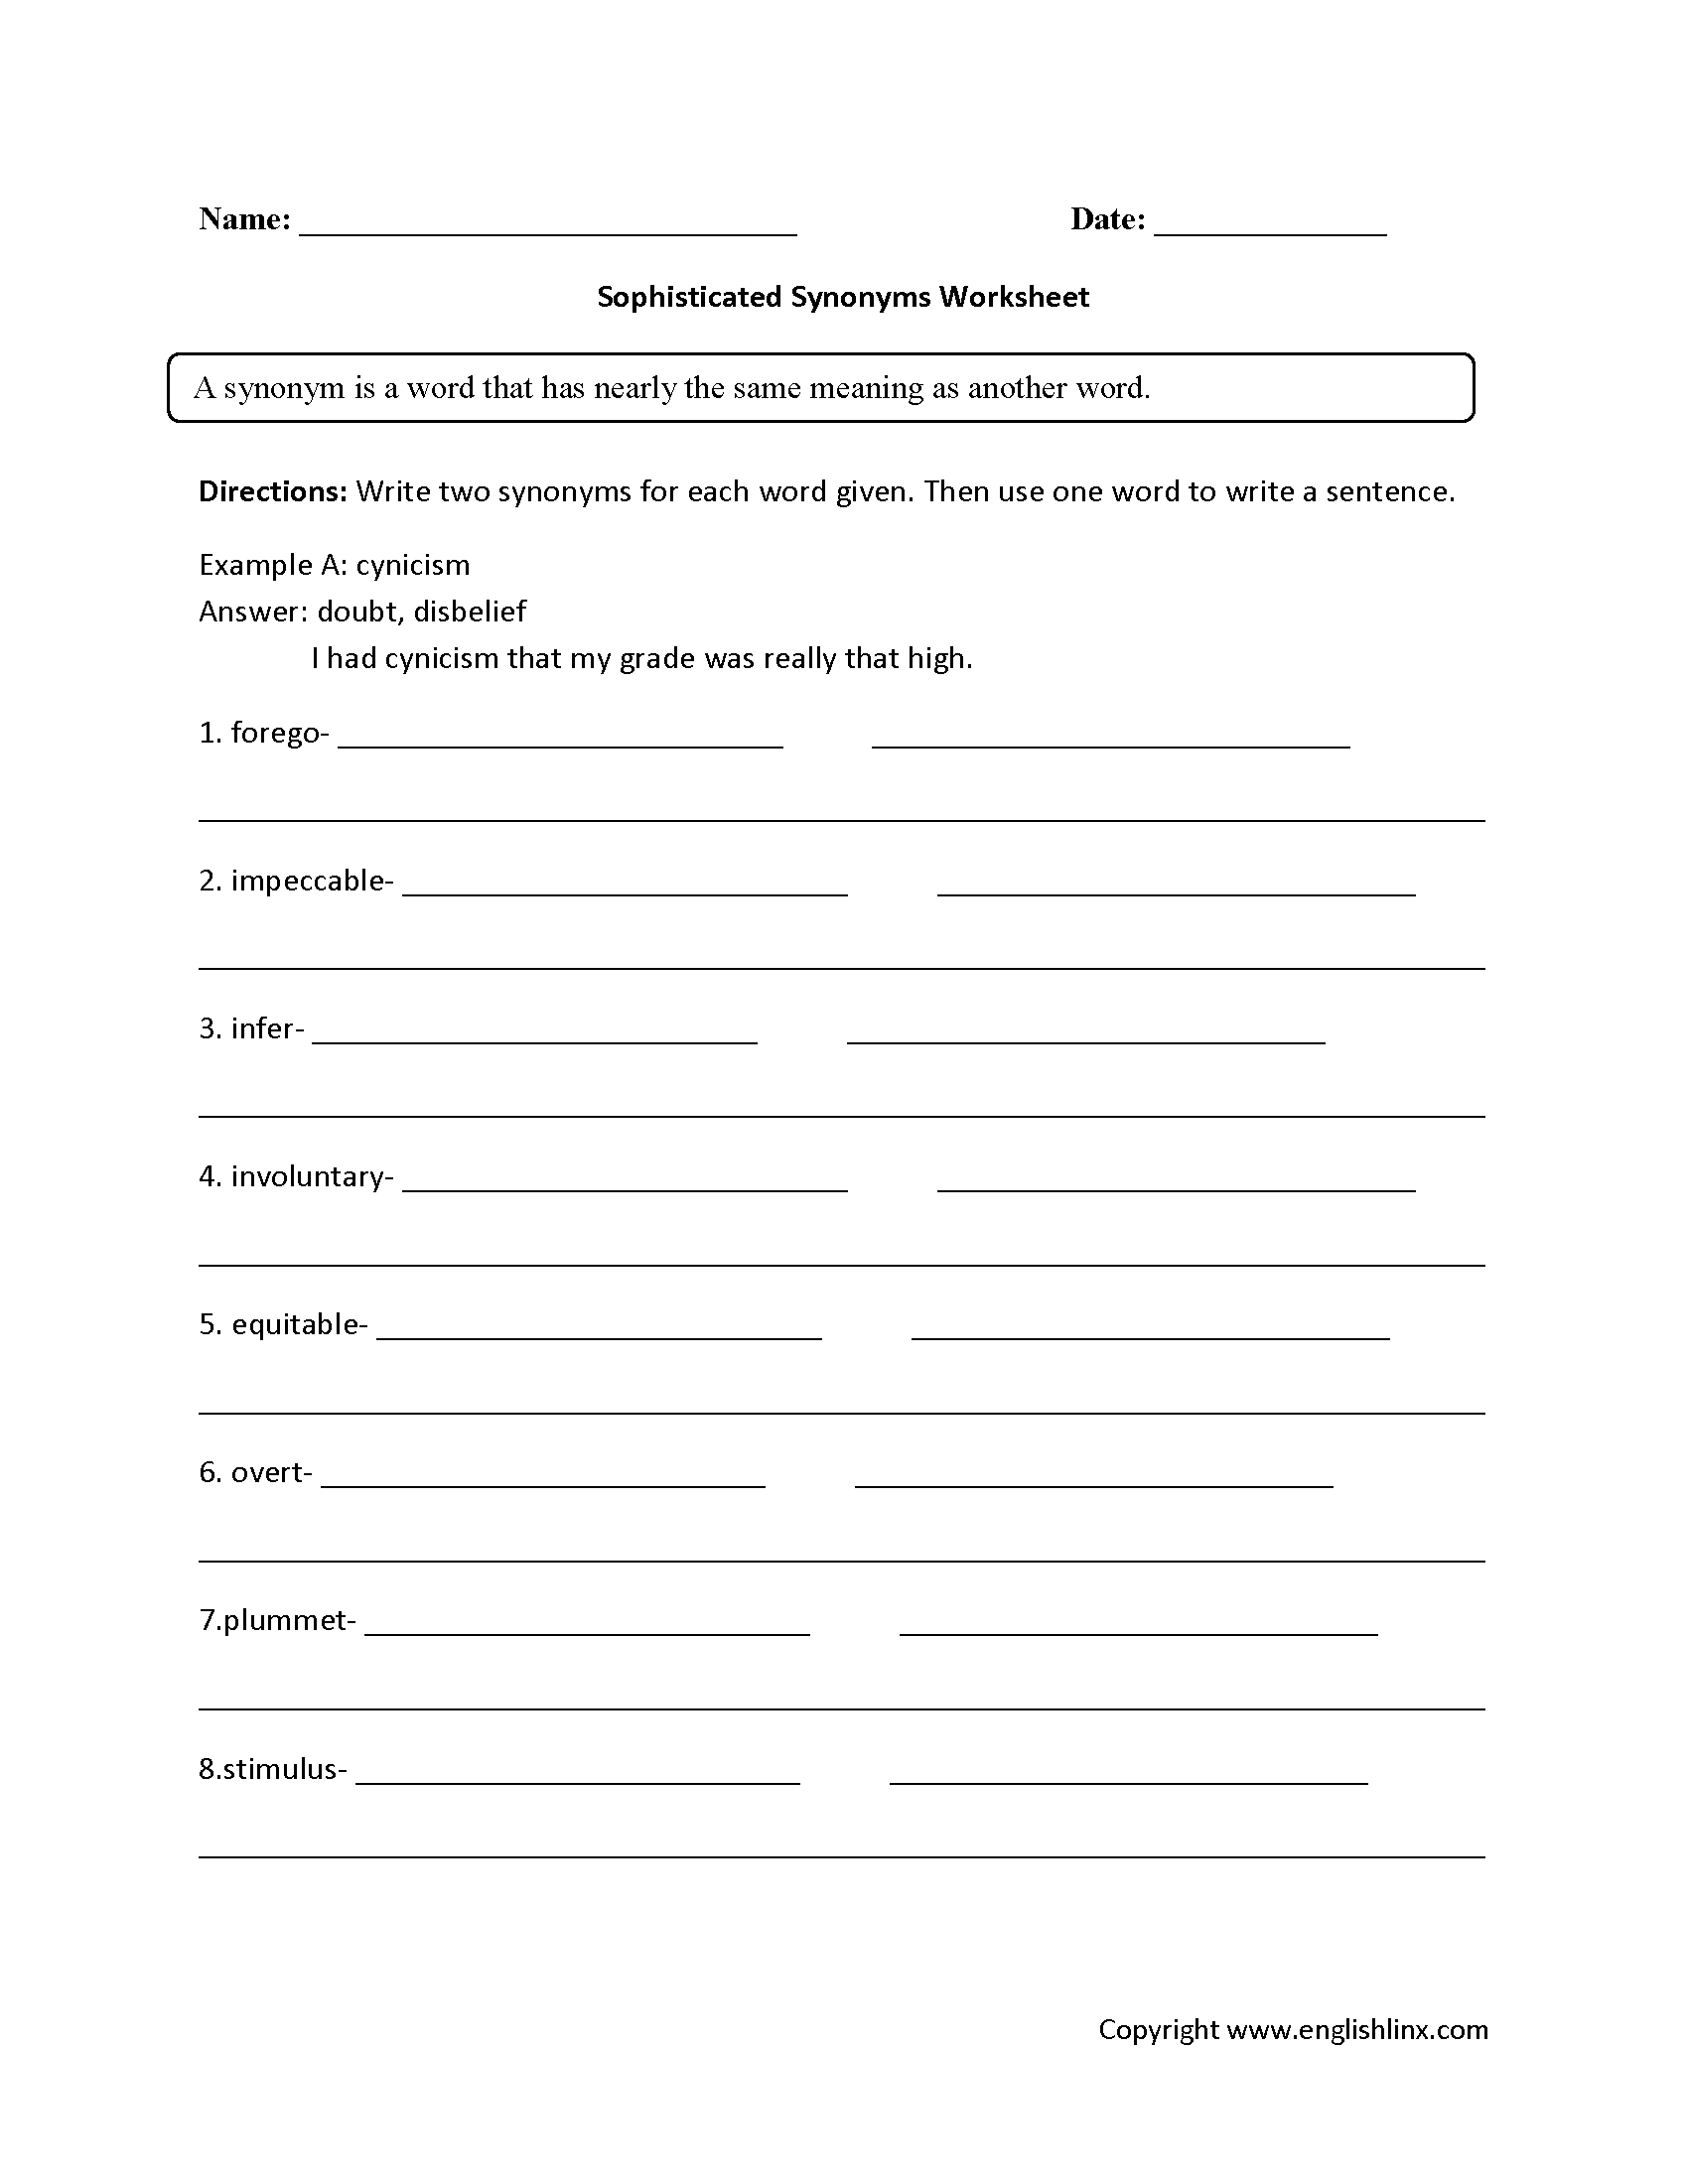 Sophisticated Synonyms Worksheets